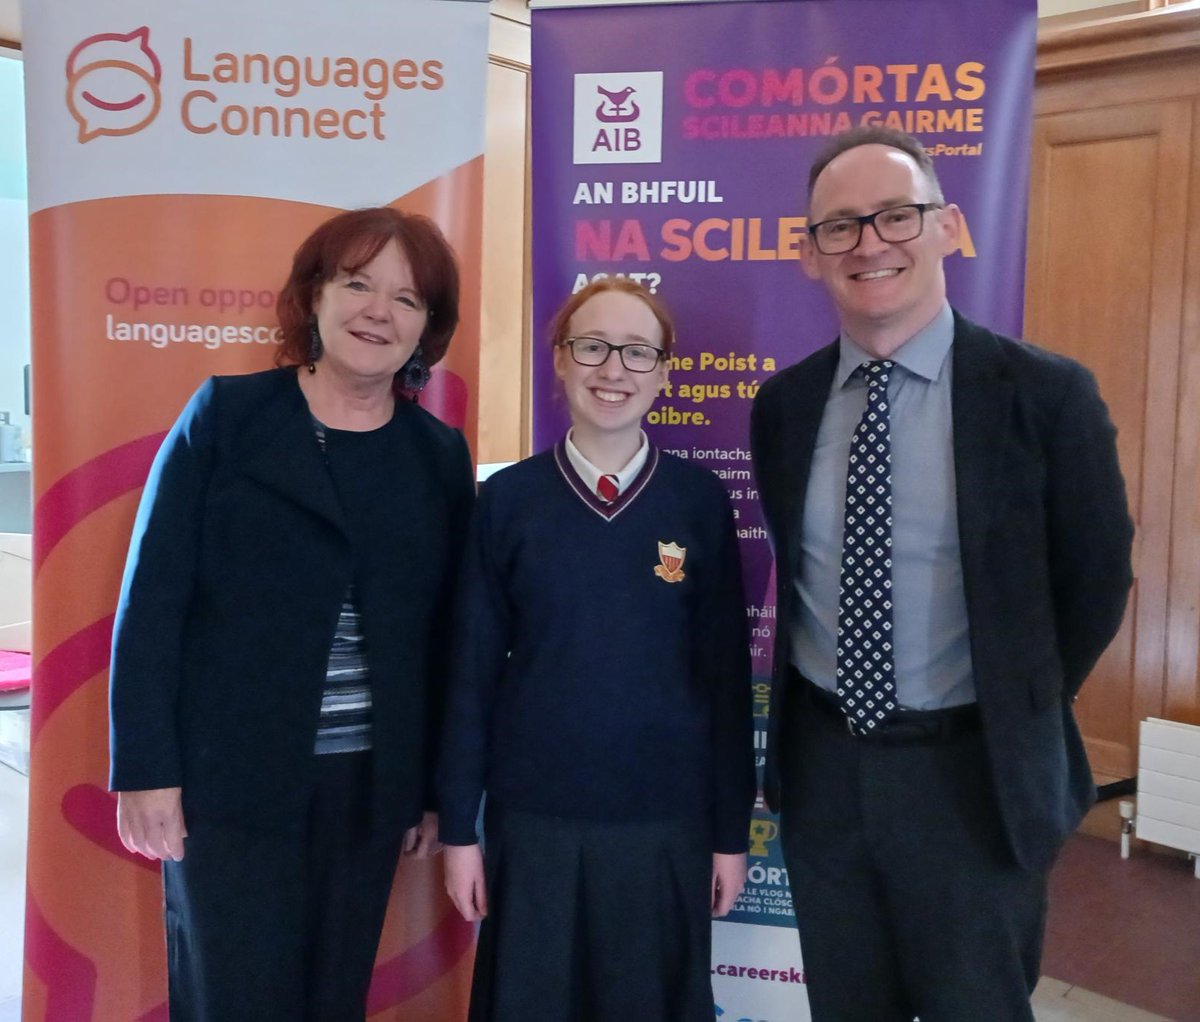 Congratulations to Aoife on winning the Languages Connect Award for Careers with a Foreign Language. She received her award at the @careersportal.ie prizegiving ceremony today. Well done to all who entered! See more about the winning entry here: bit.ly/CareerSkills24